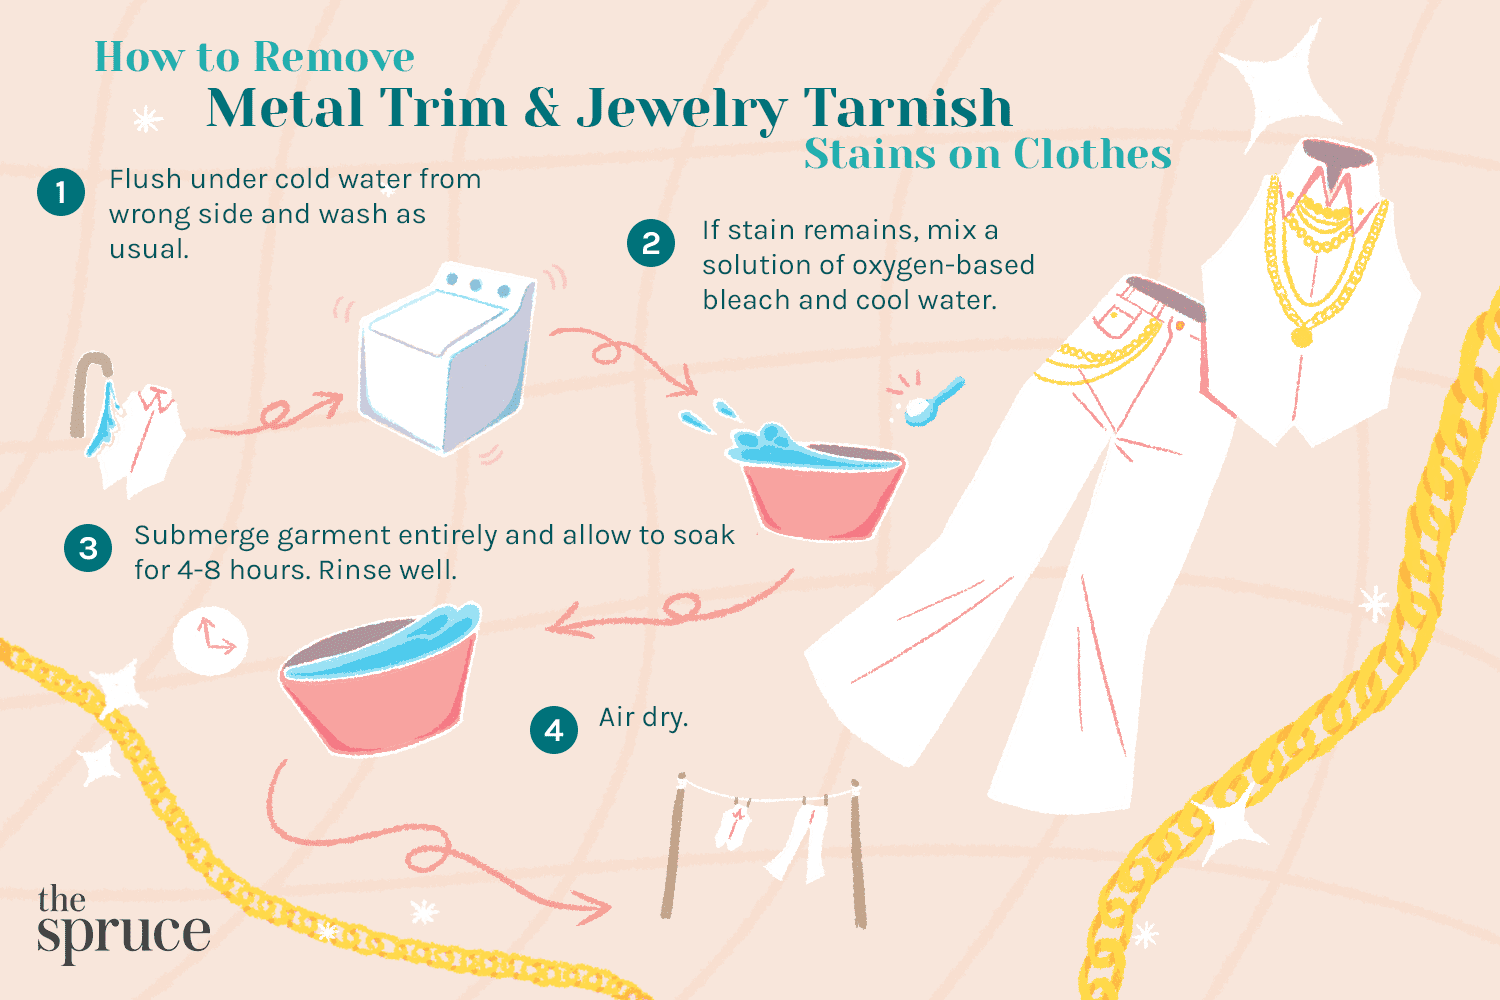 How to Remove Metal Trim and Jewelry Tarnish Stains